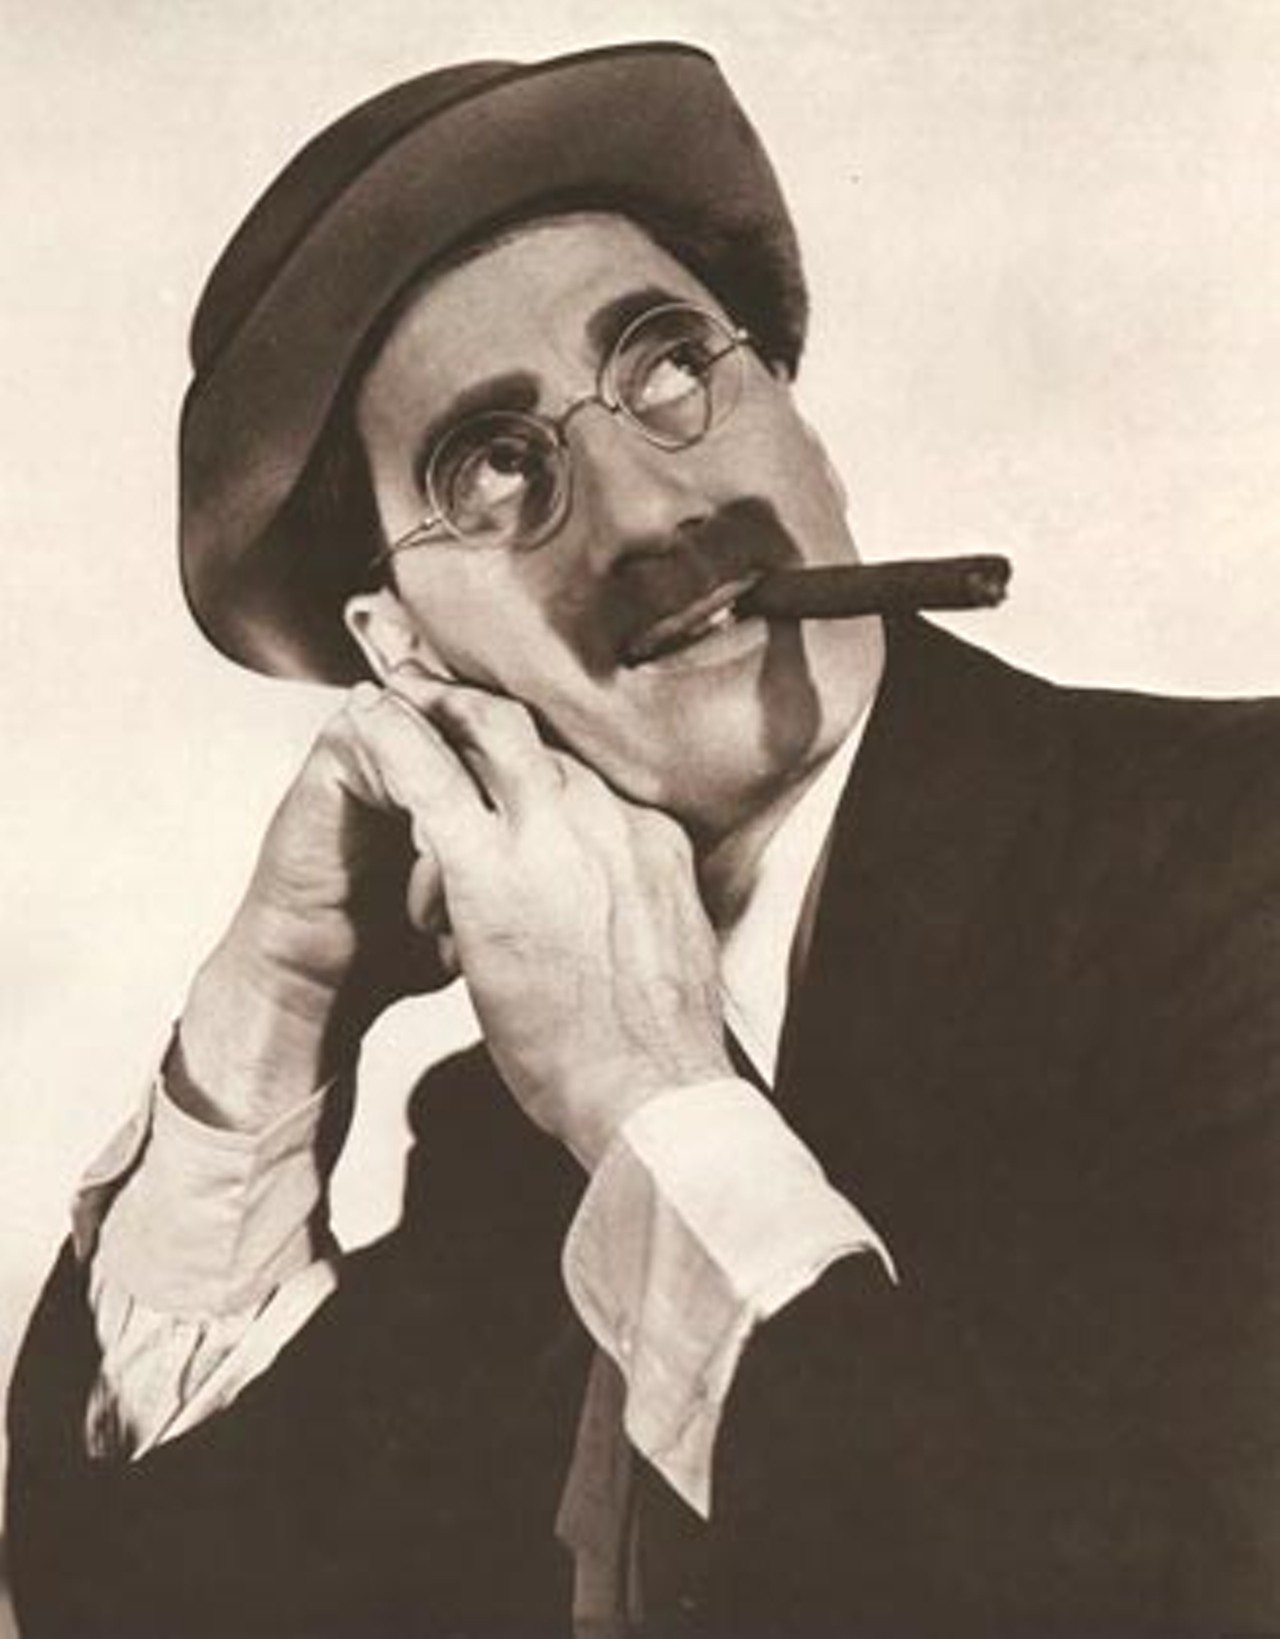 Groucho Marx (1890-1977) was most distinctive for his mustache, eyebrows and glasses.